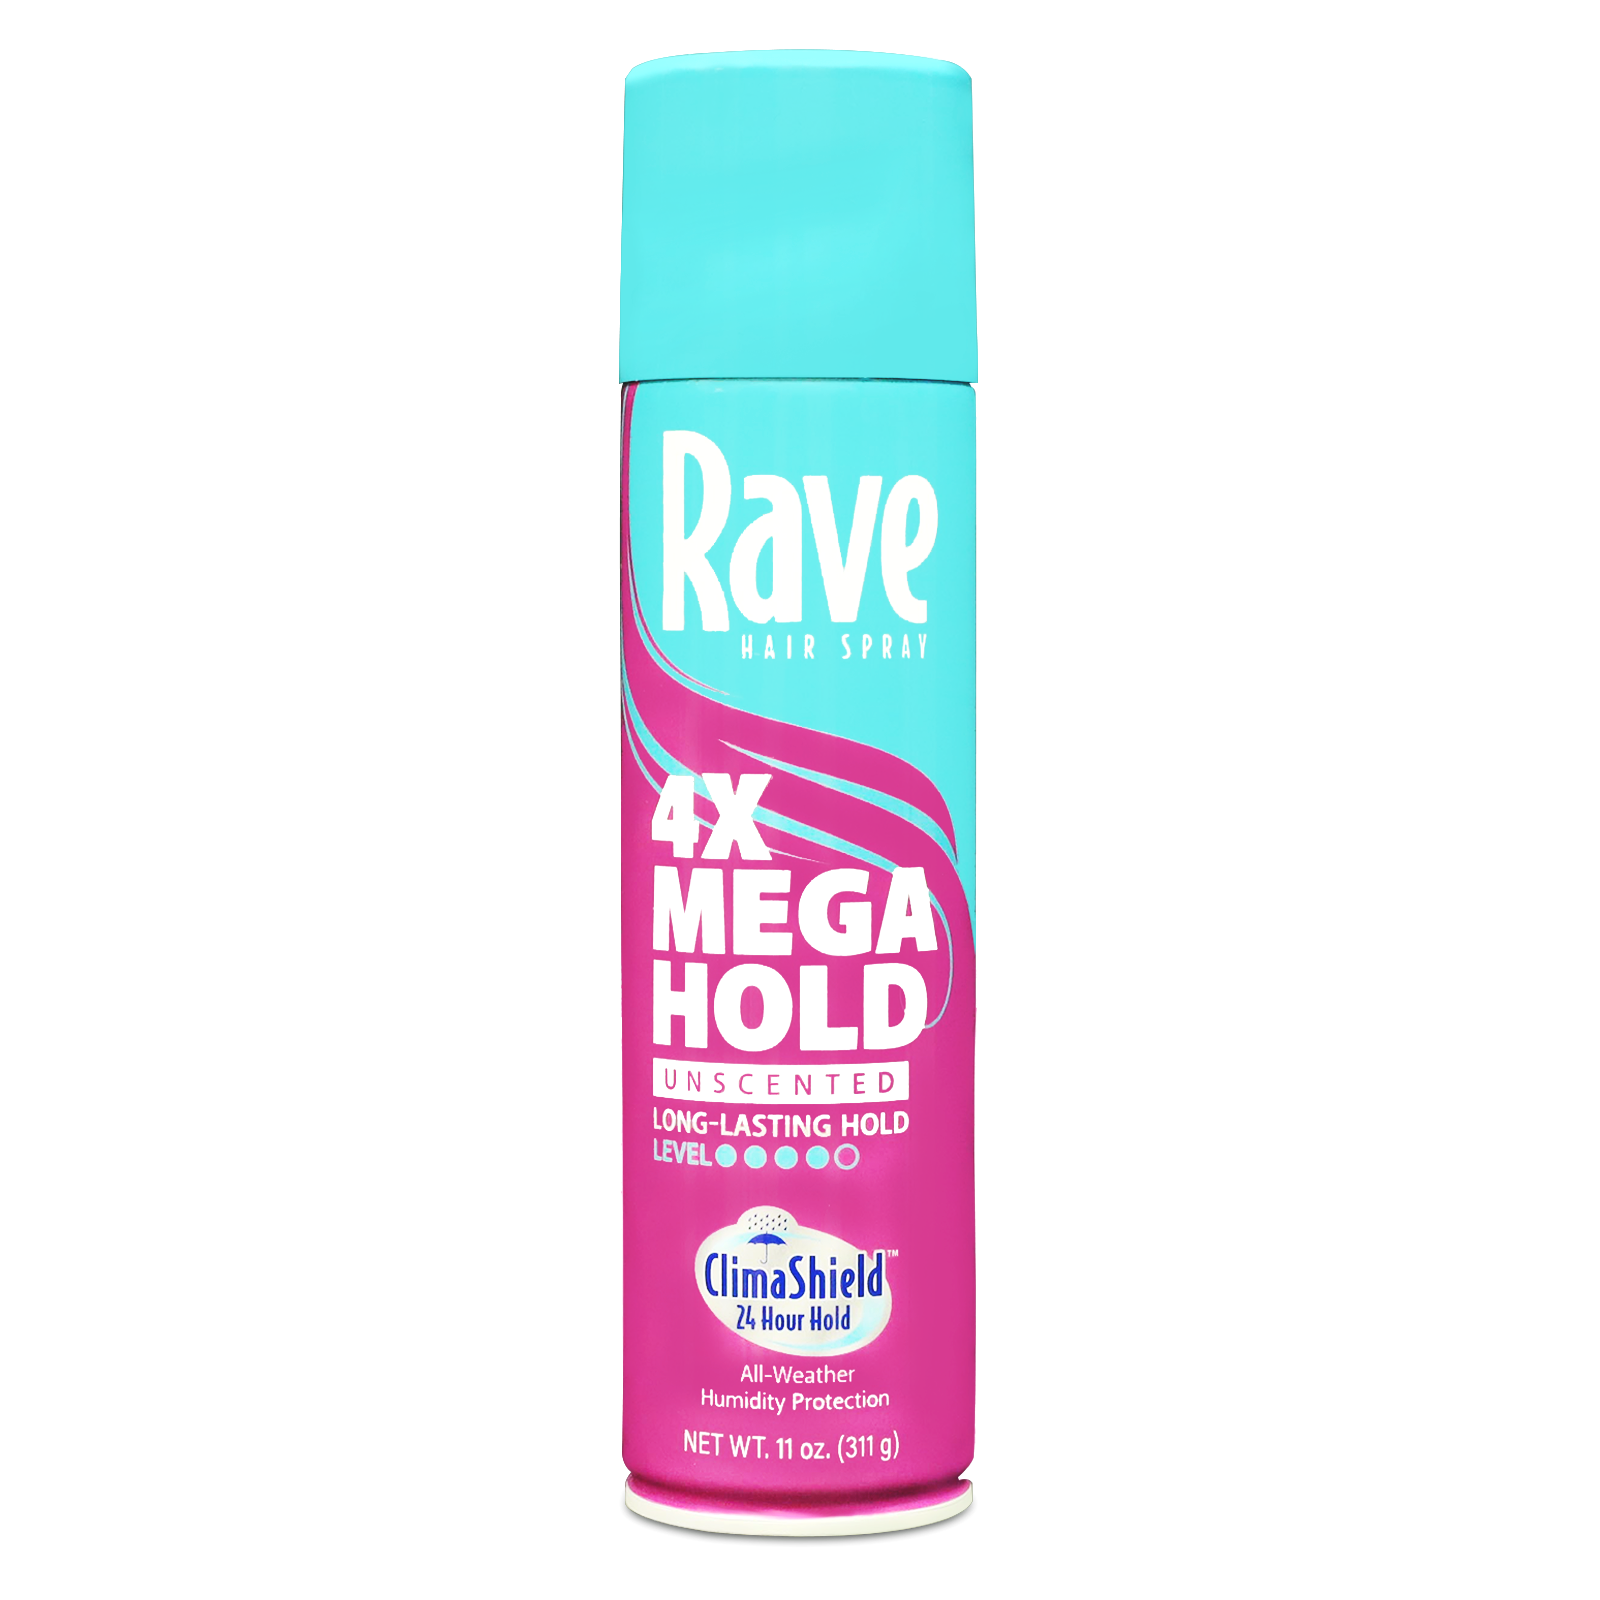 Rave 4X Mega Hold Hair Spray, All-Weather Protection with Vitamin-Rich Formula, 11 oz - image 1 of 8